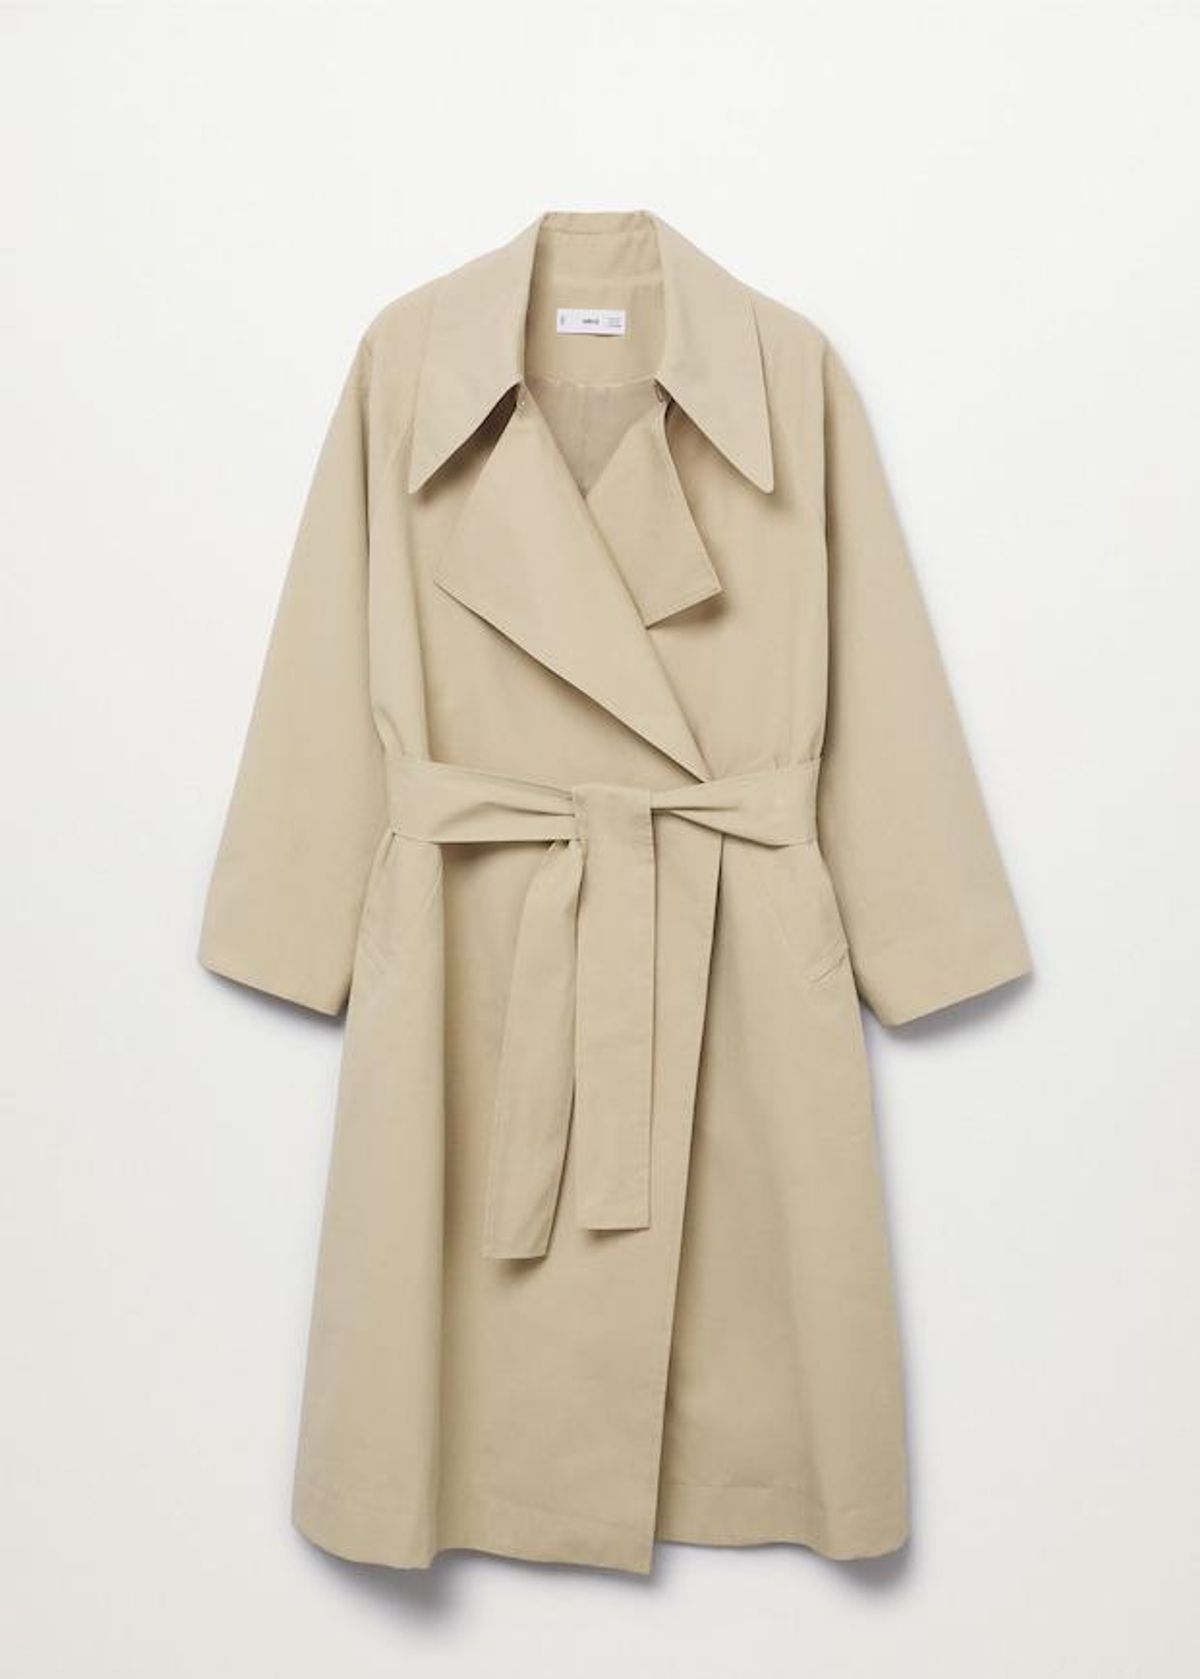 Long Flowy Trench Coats